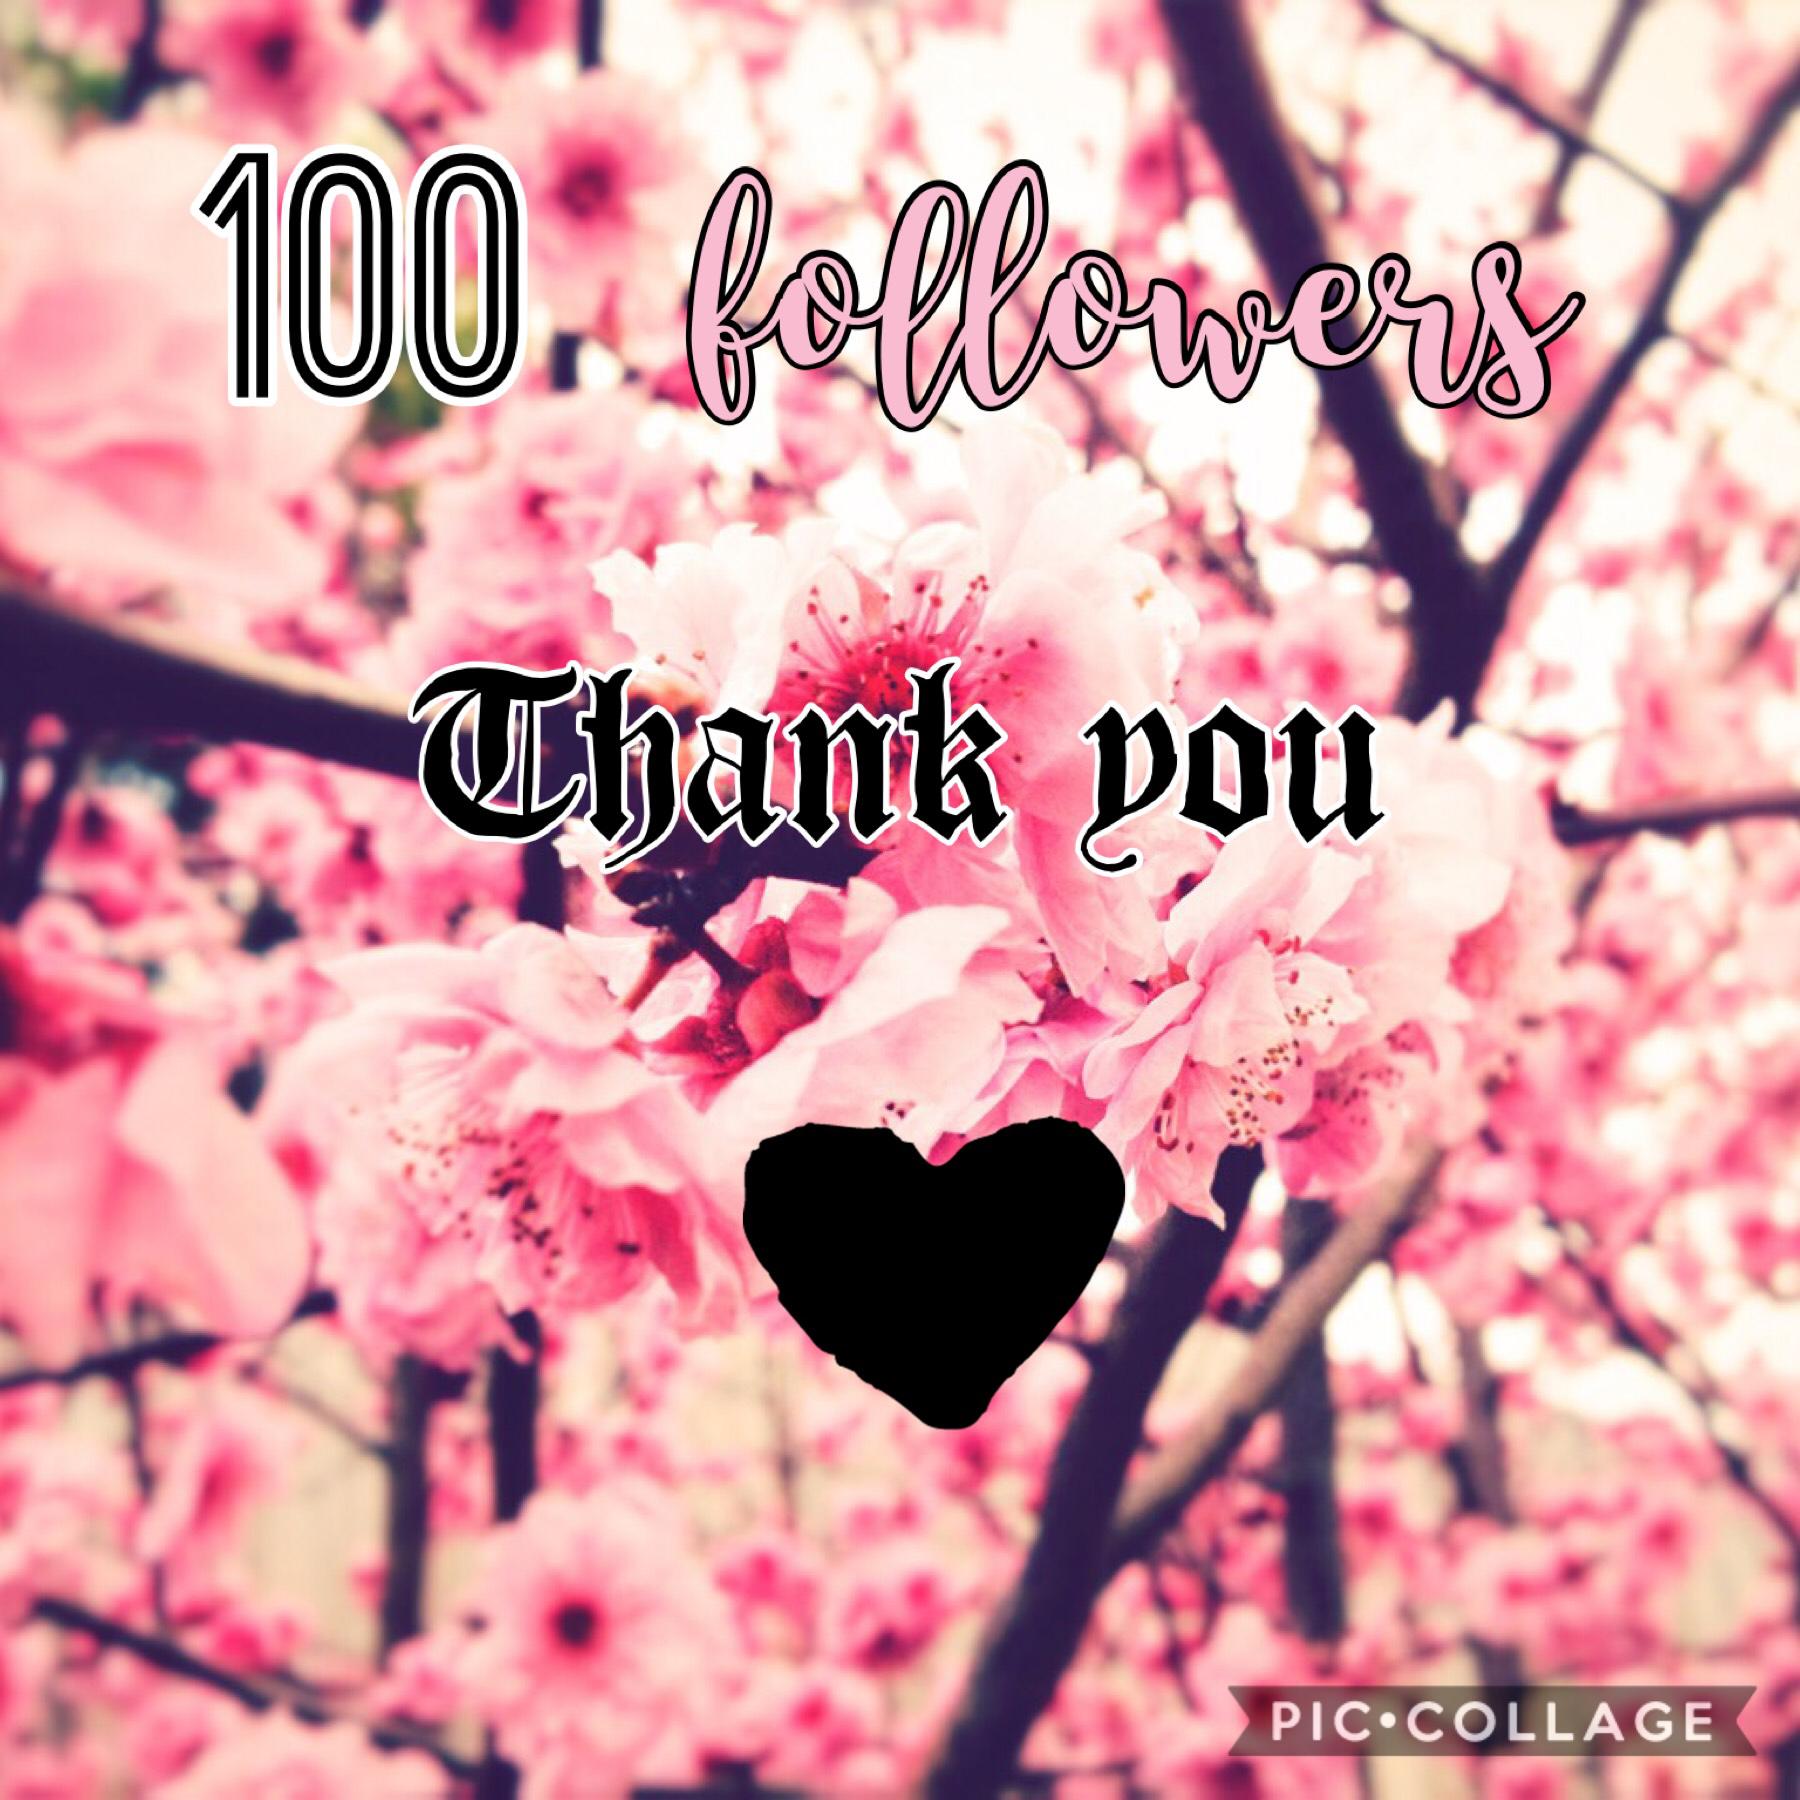 Thank you for the follows, likes and comments 💕♥️